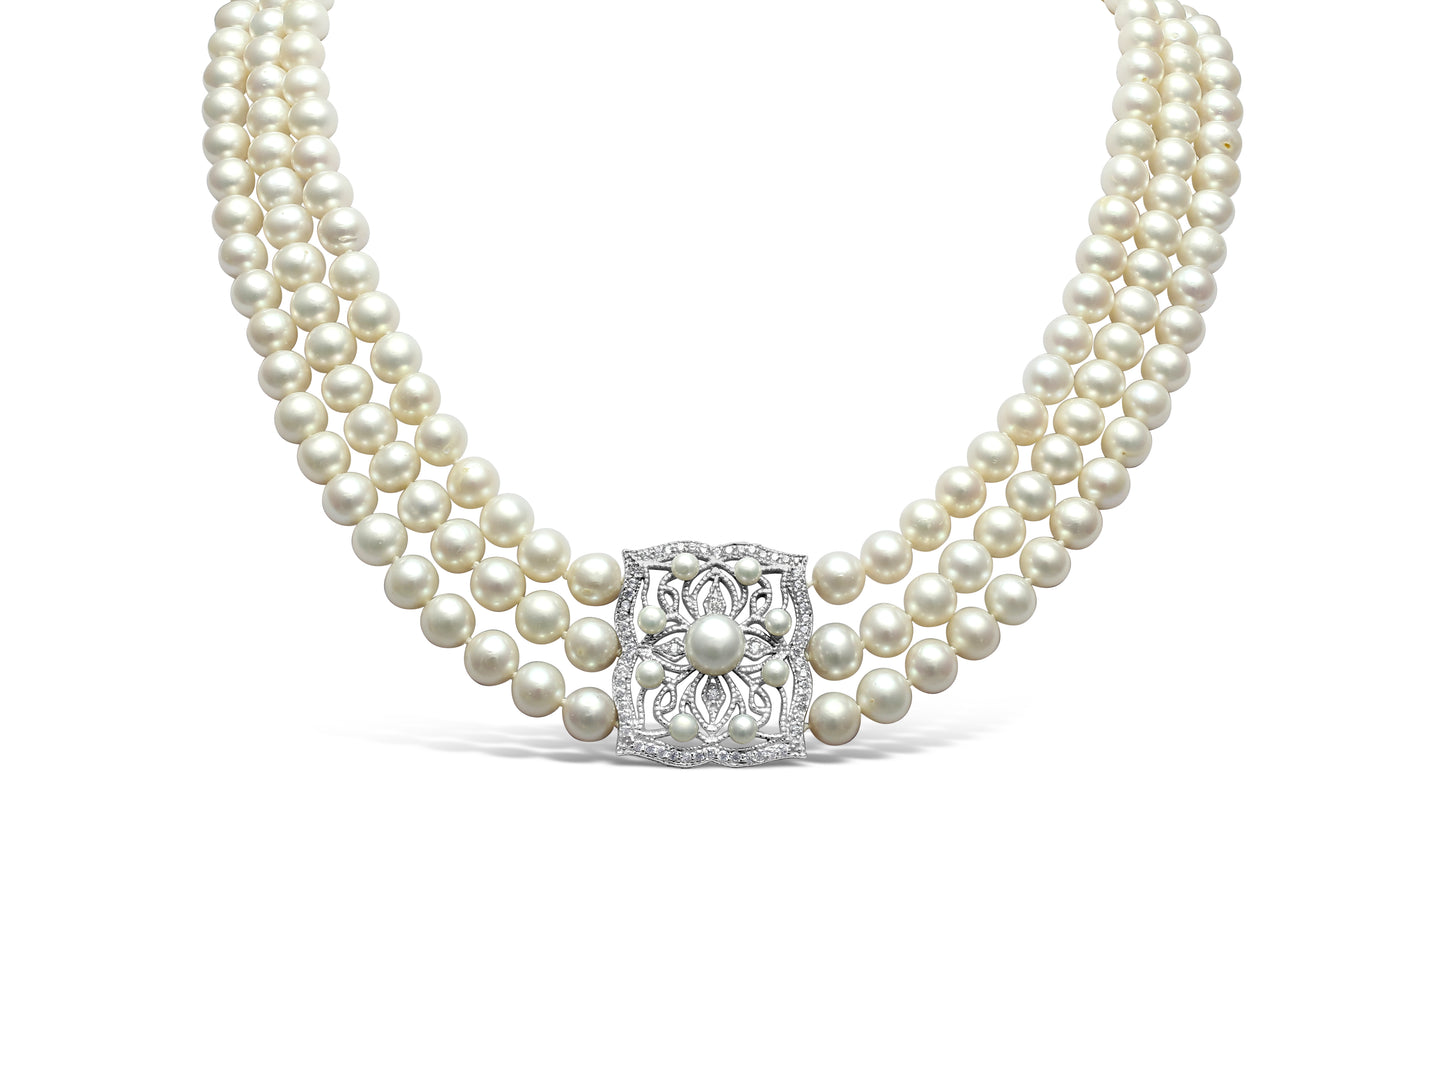 Stella triple strand cultured freshwater pearl necklace with vintage style pave feature with pearls